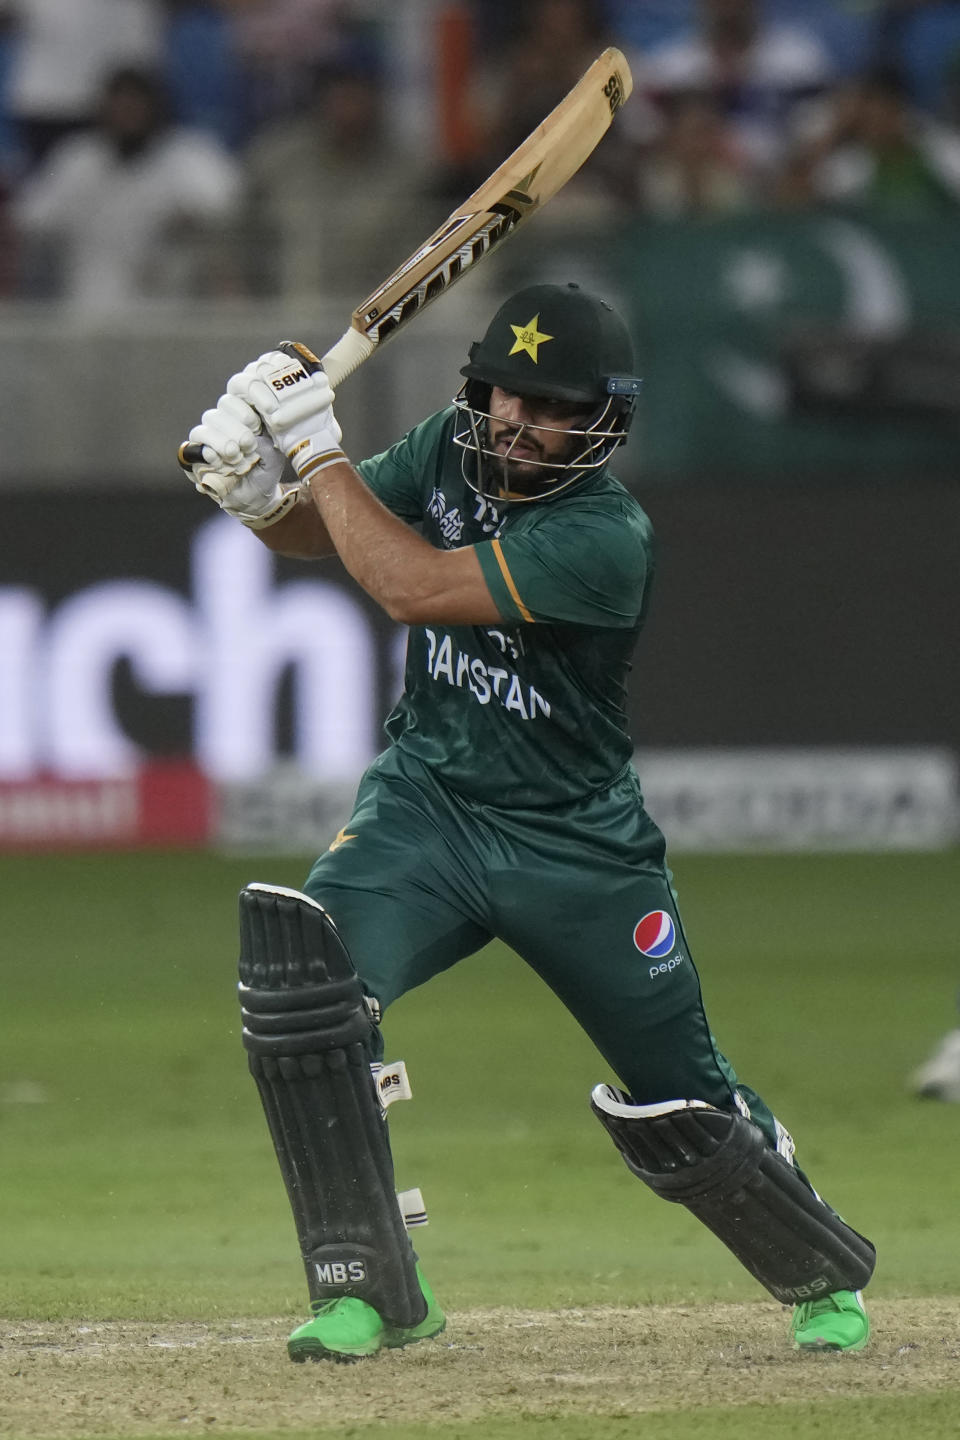 Pakistan's Mohammad Nawaz plays a shot during the T20 cricket match of Asia Cup between India and Pakistan, in Dubai, United Arab Emirates, Sunday, Sept. 4, 2022. (AP Photo/Anjum Naveed)